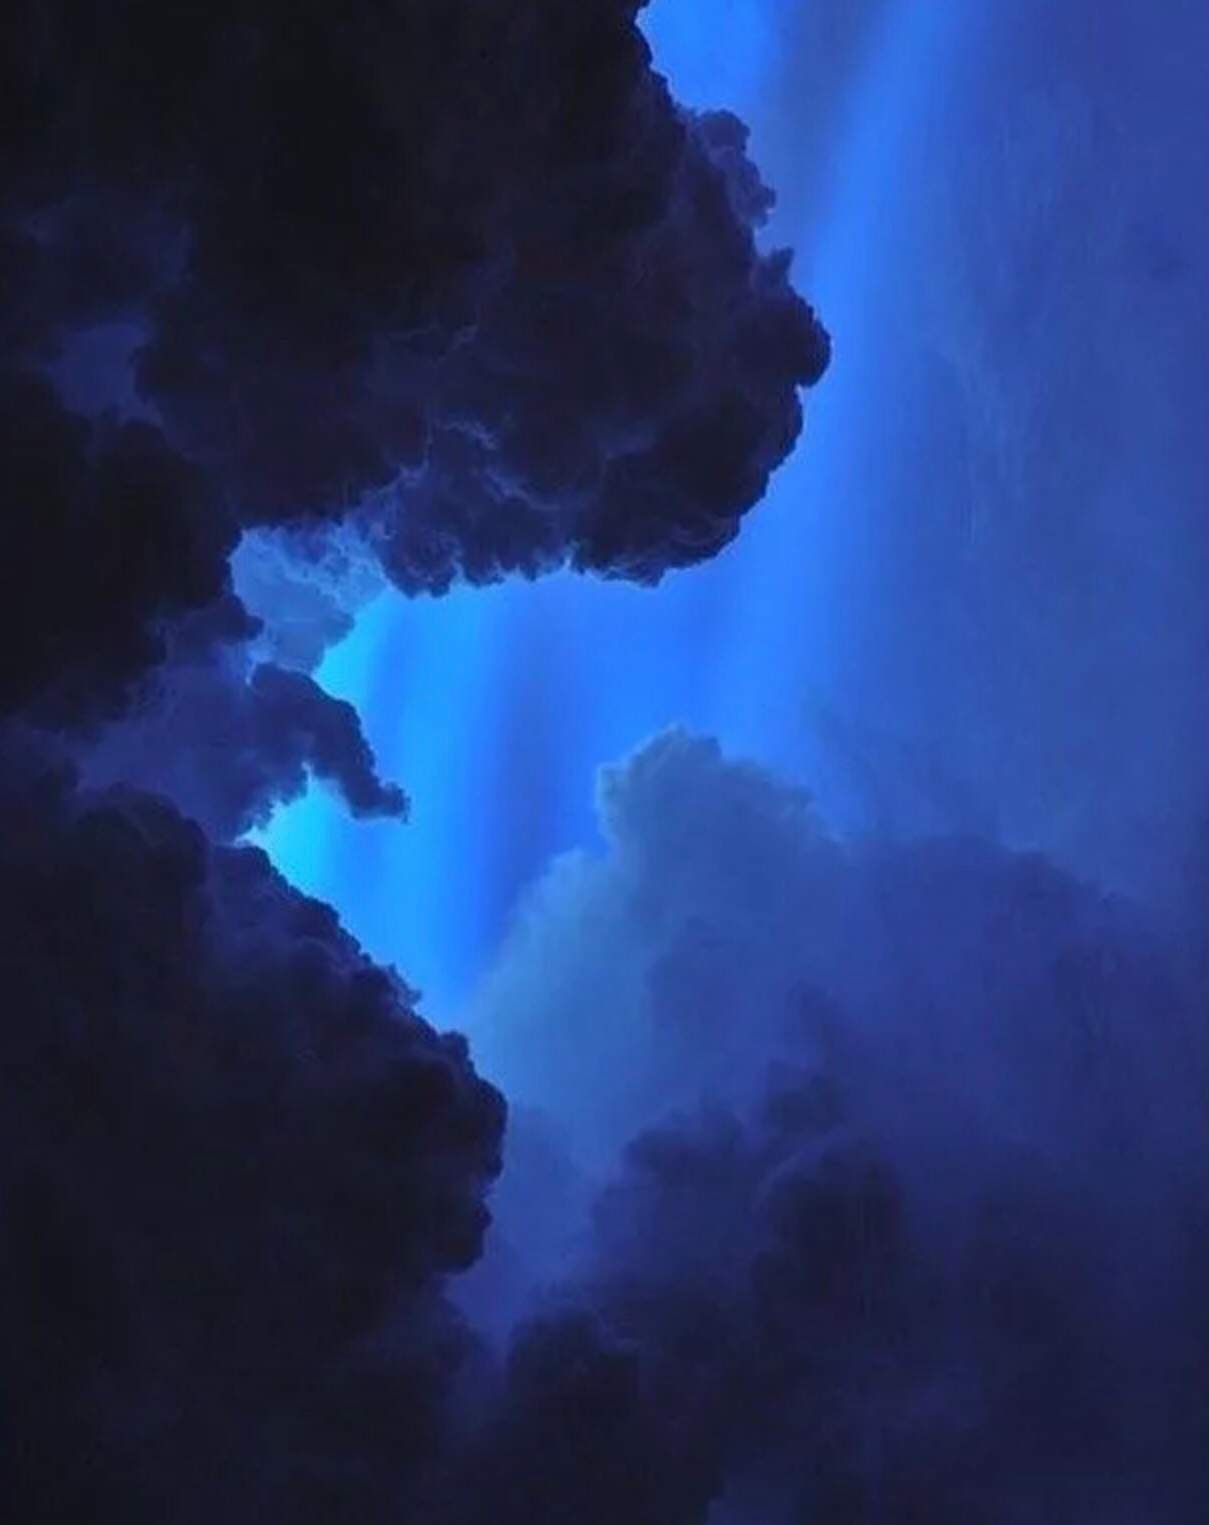 A dark cloud with blue light coming from it - Navy blue, indigo